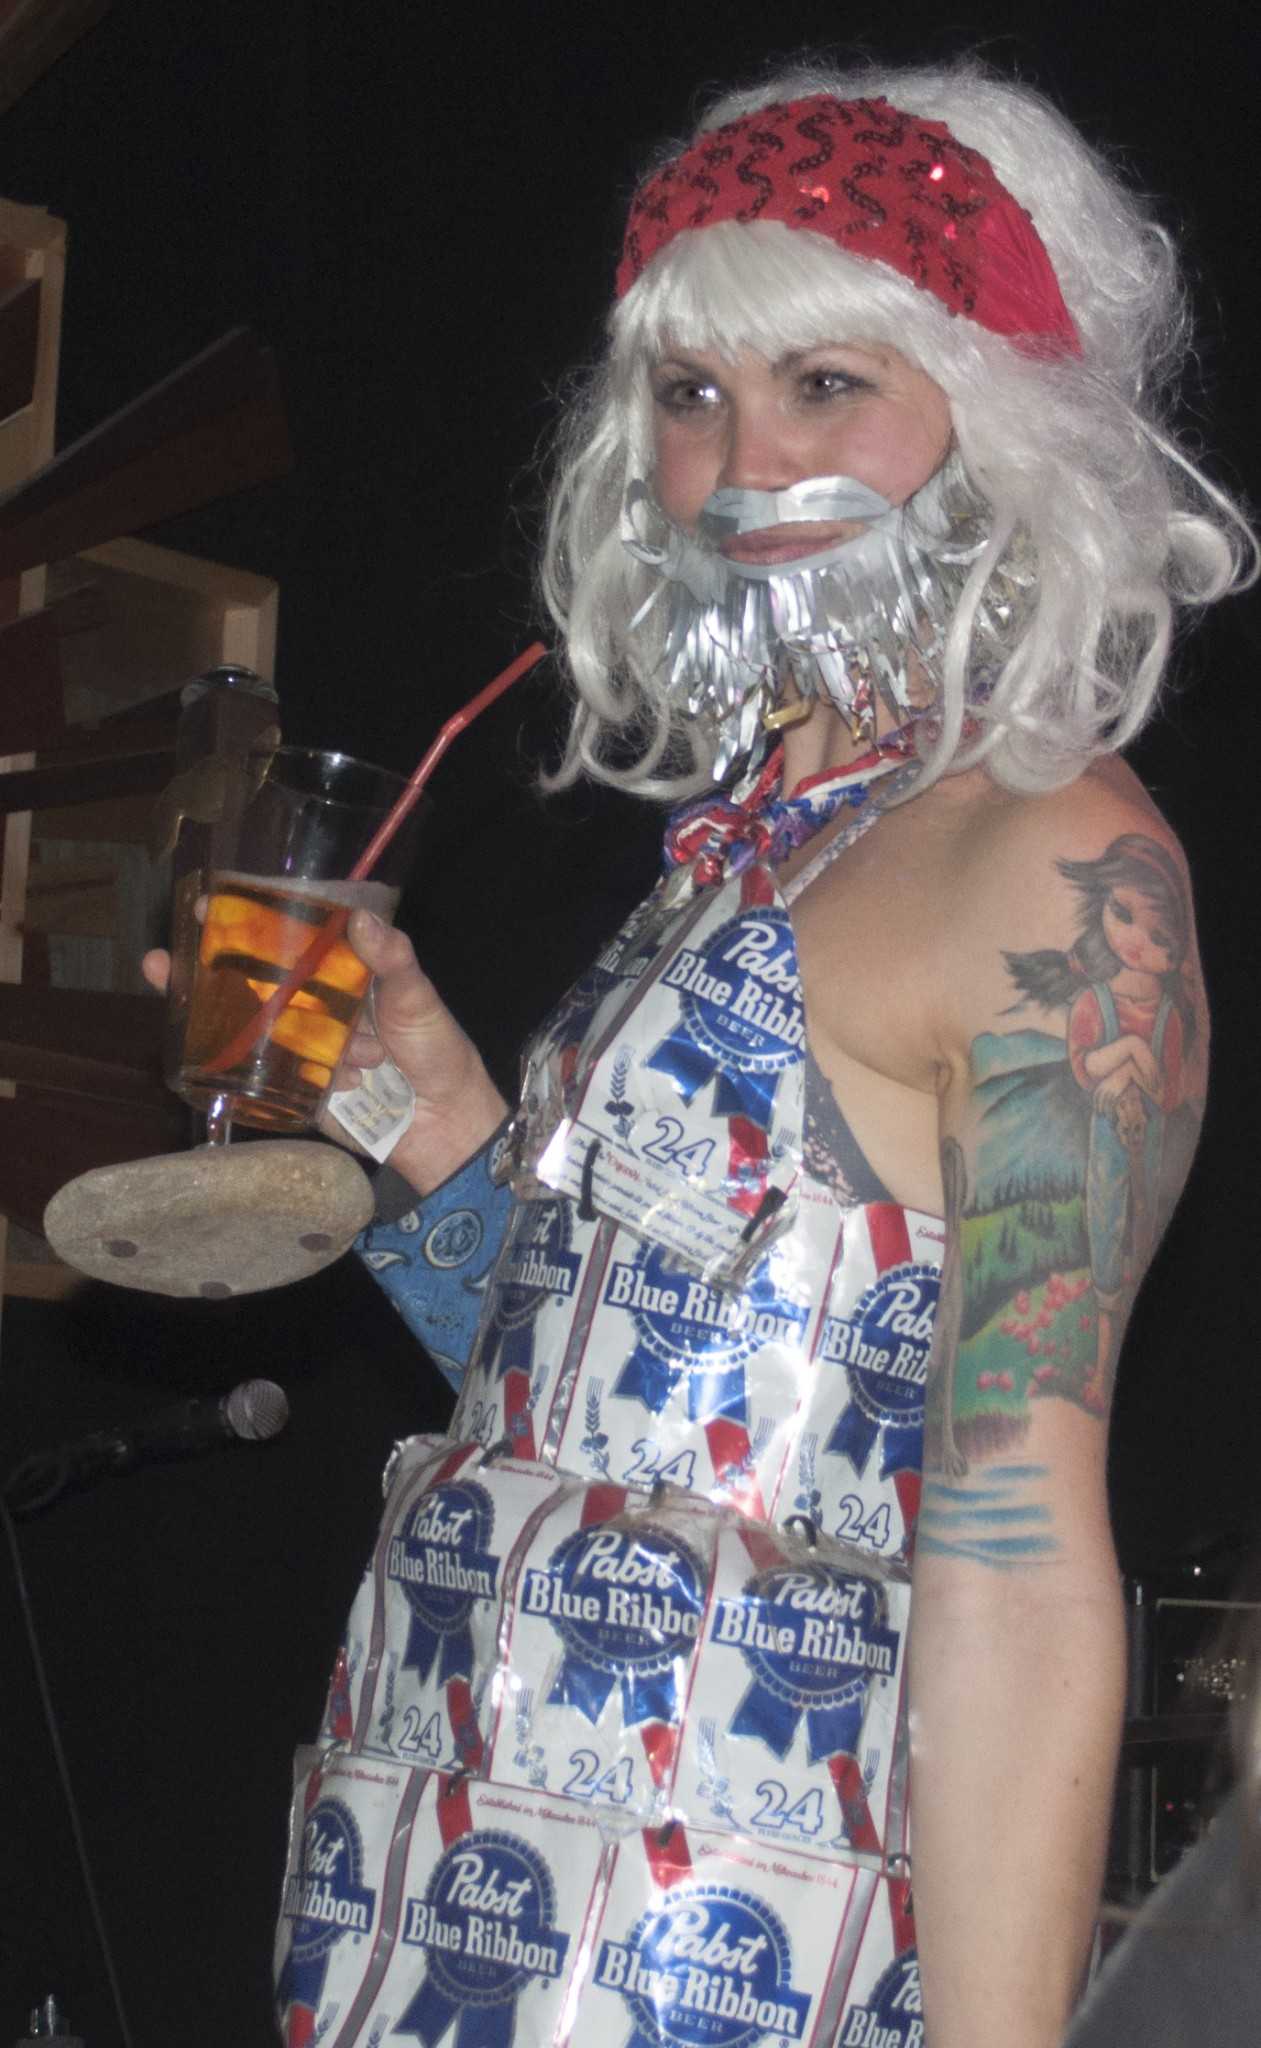 Beard and Moustache Party attendee Kappa Hobbs in her hand-made Pabst Blue Ribbon dress. Photo Credit: Emma Speckman